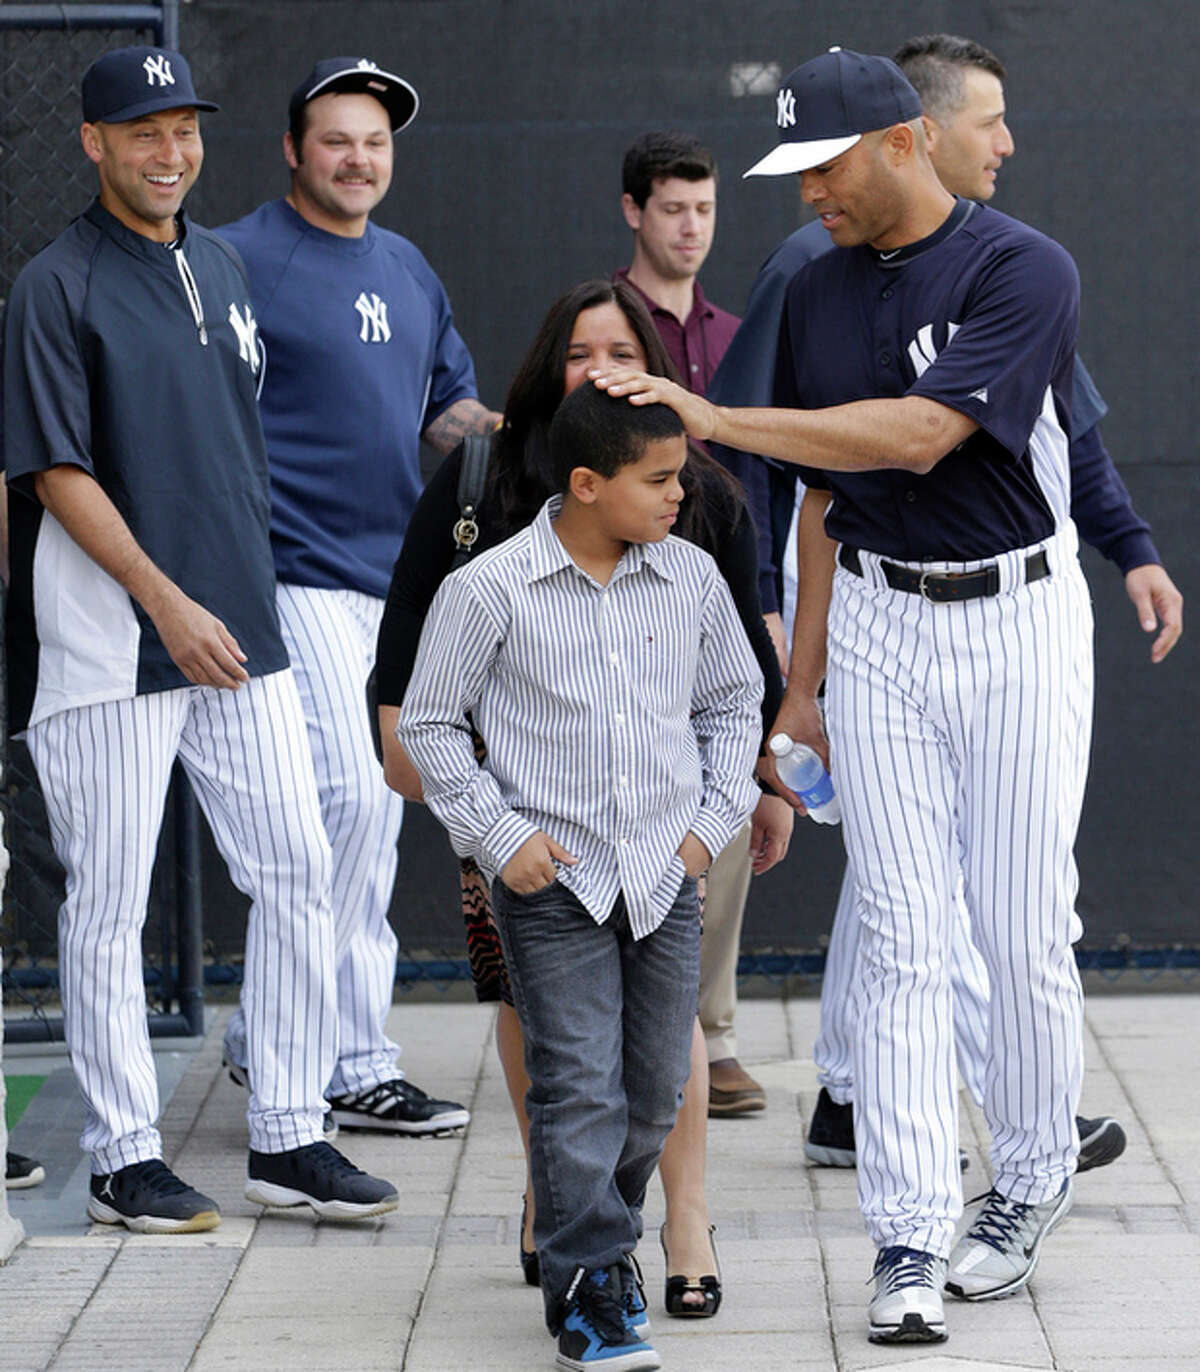 New York Yankees shortstop Derek Jeter, far left, and reliever Joba Chamberlain, second from left, watch as pitcher Mariano Rivera, far right, pats his son Jaziel on the head before a news conference announcing his plans to retire at the end of the 2013 season at Steinbrenner Field Saturday, March 9, 2013, in Tampa, Fla. Yankees pitcher Andy Pettitte is behind Rivera. Rivera holds baseball's all-time saves leader. (AP Photo/Kathy Willens)